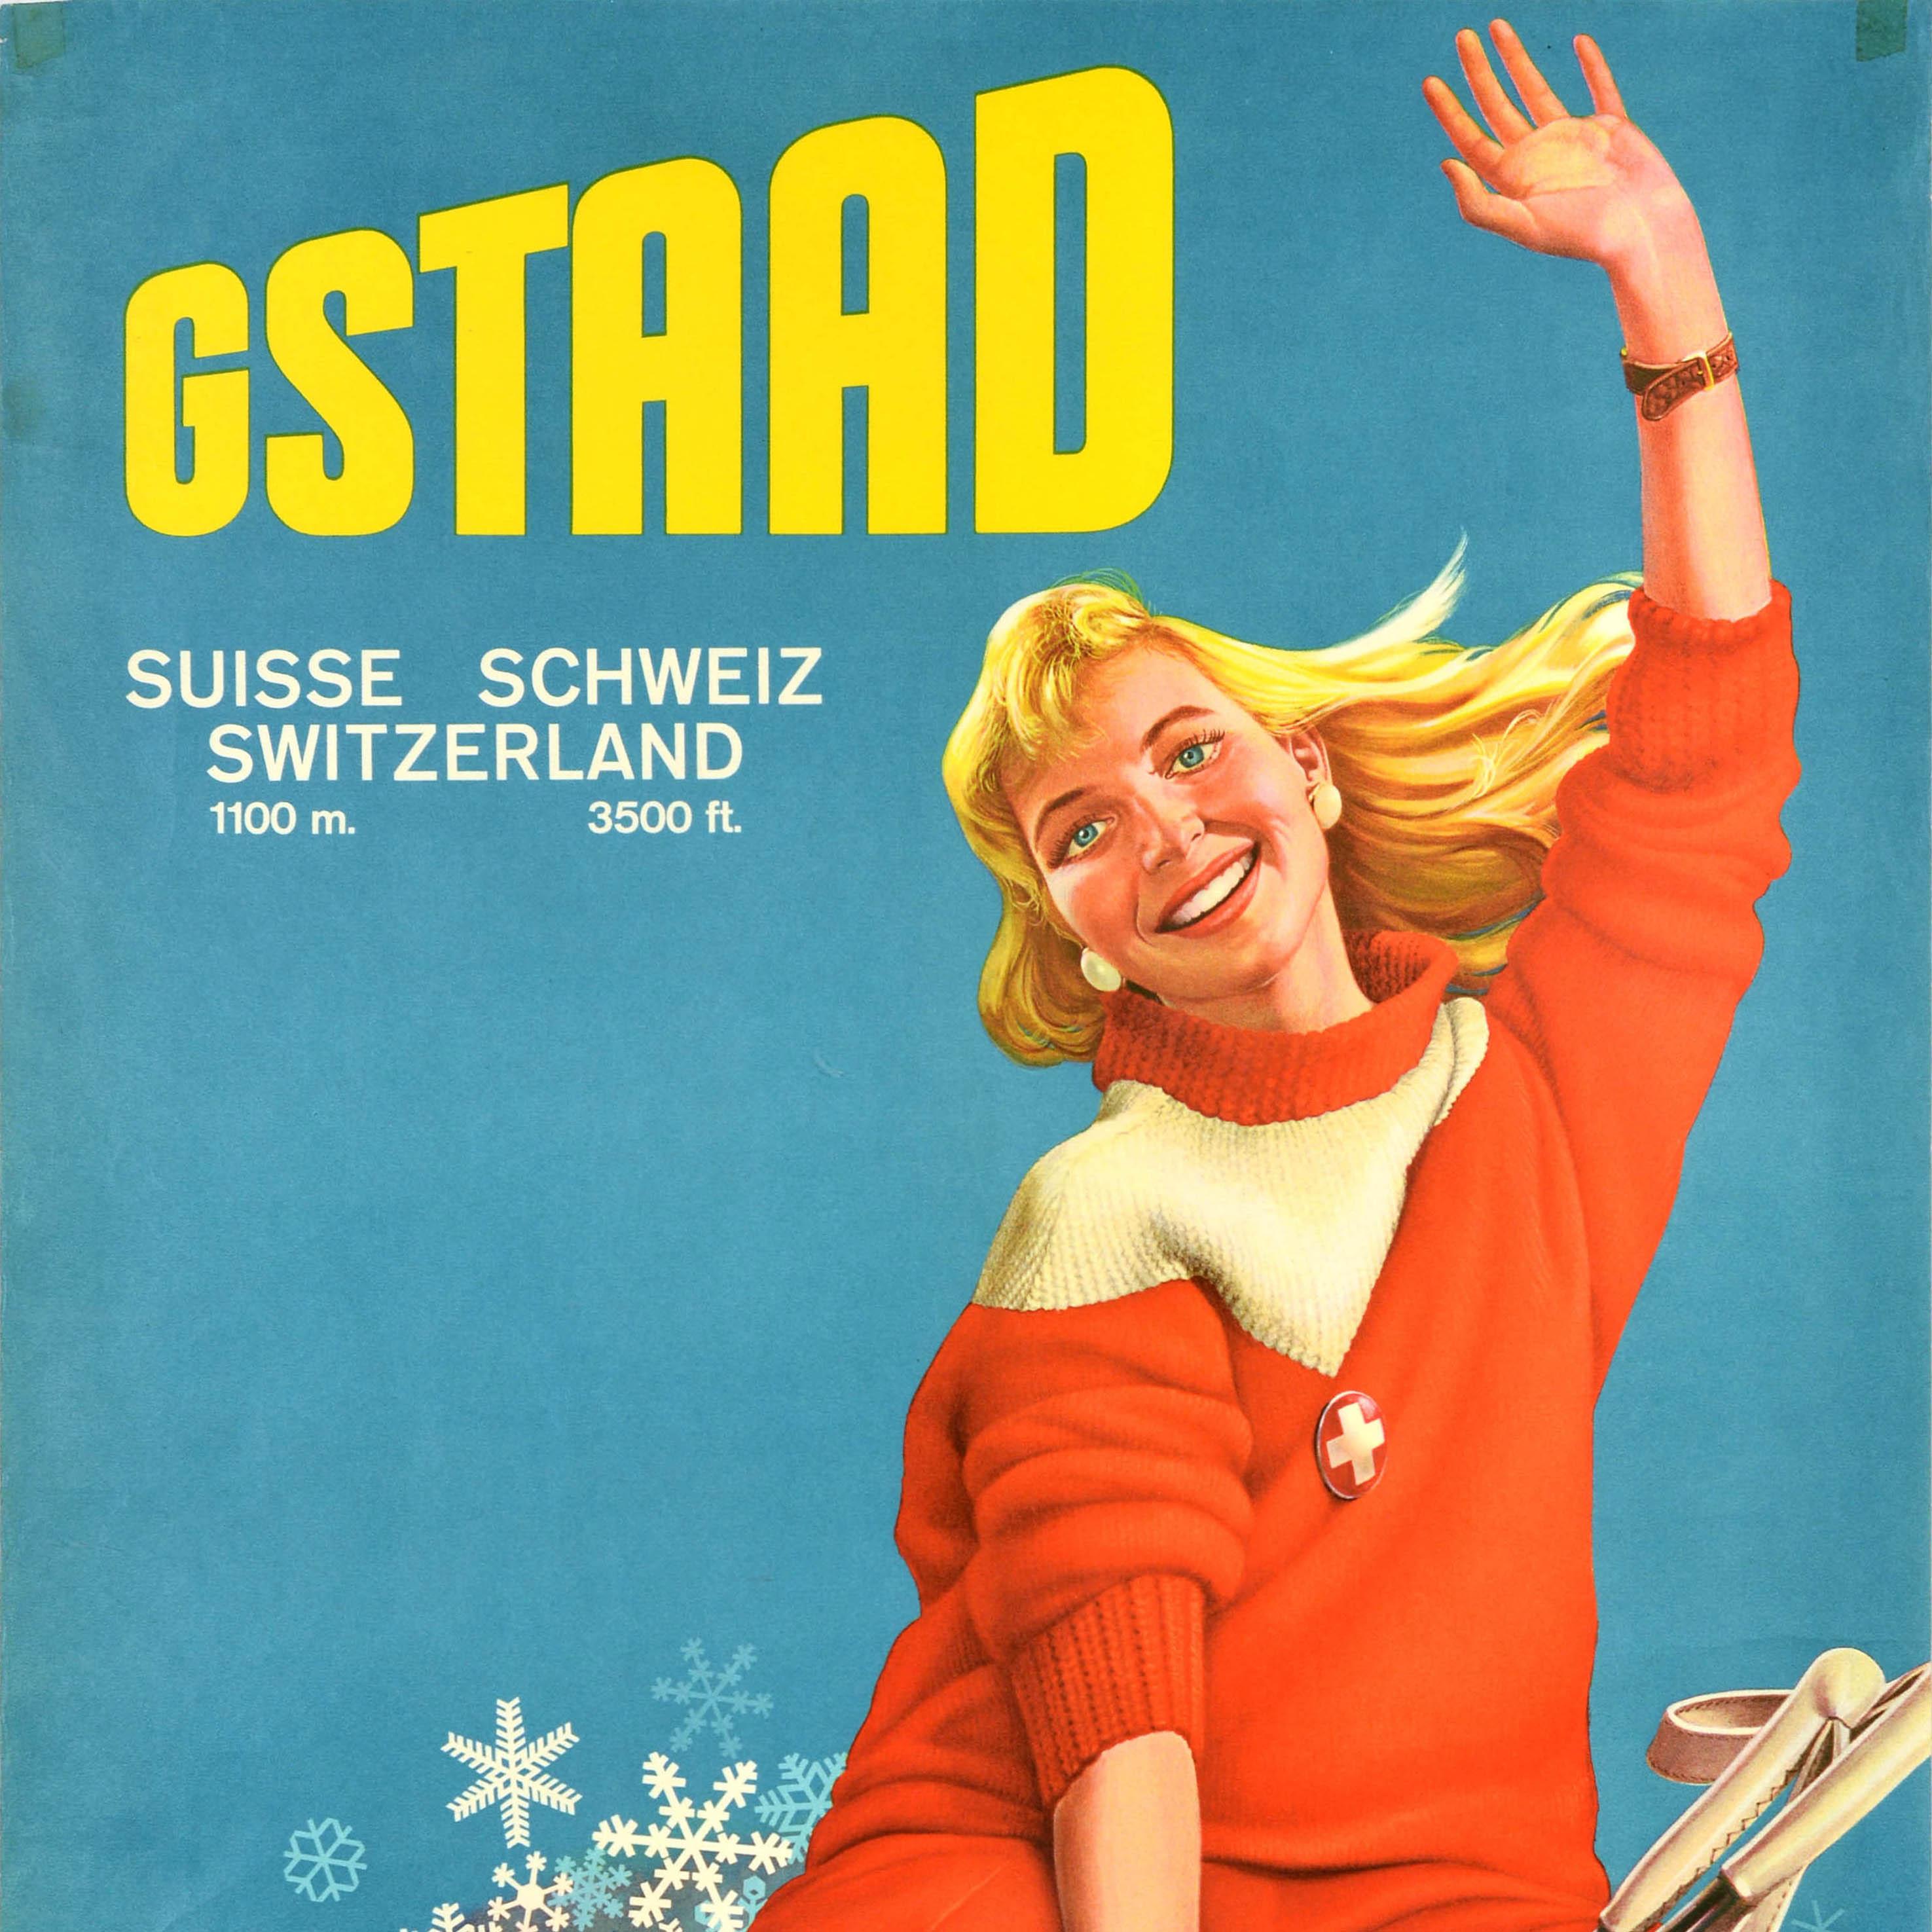 Original vintage travel and skiing poster for Gstaad Suisse Schweiz Switzerland 1100m 3500ft featuring an image of a smiling lady sitting on a cloud of snowflakes holding ski poles in one hand and waving to the viewer with her other hand, the Swiss